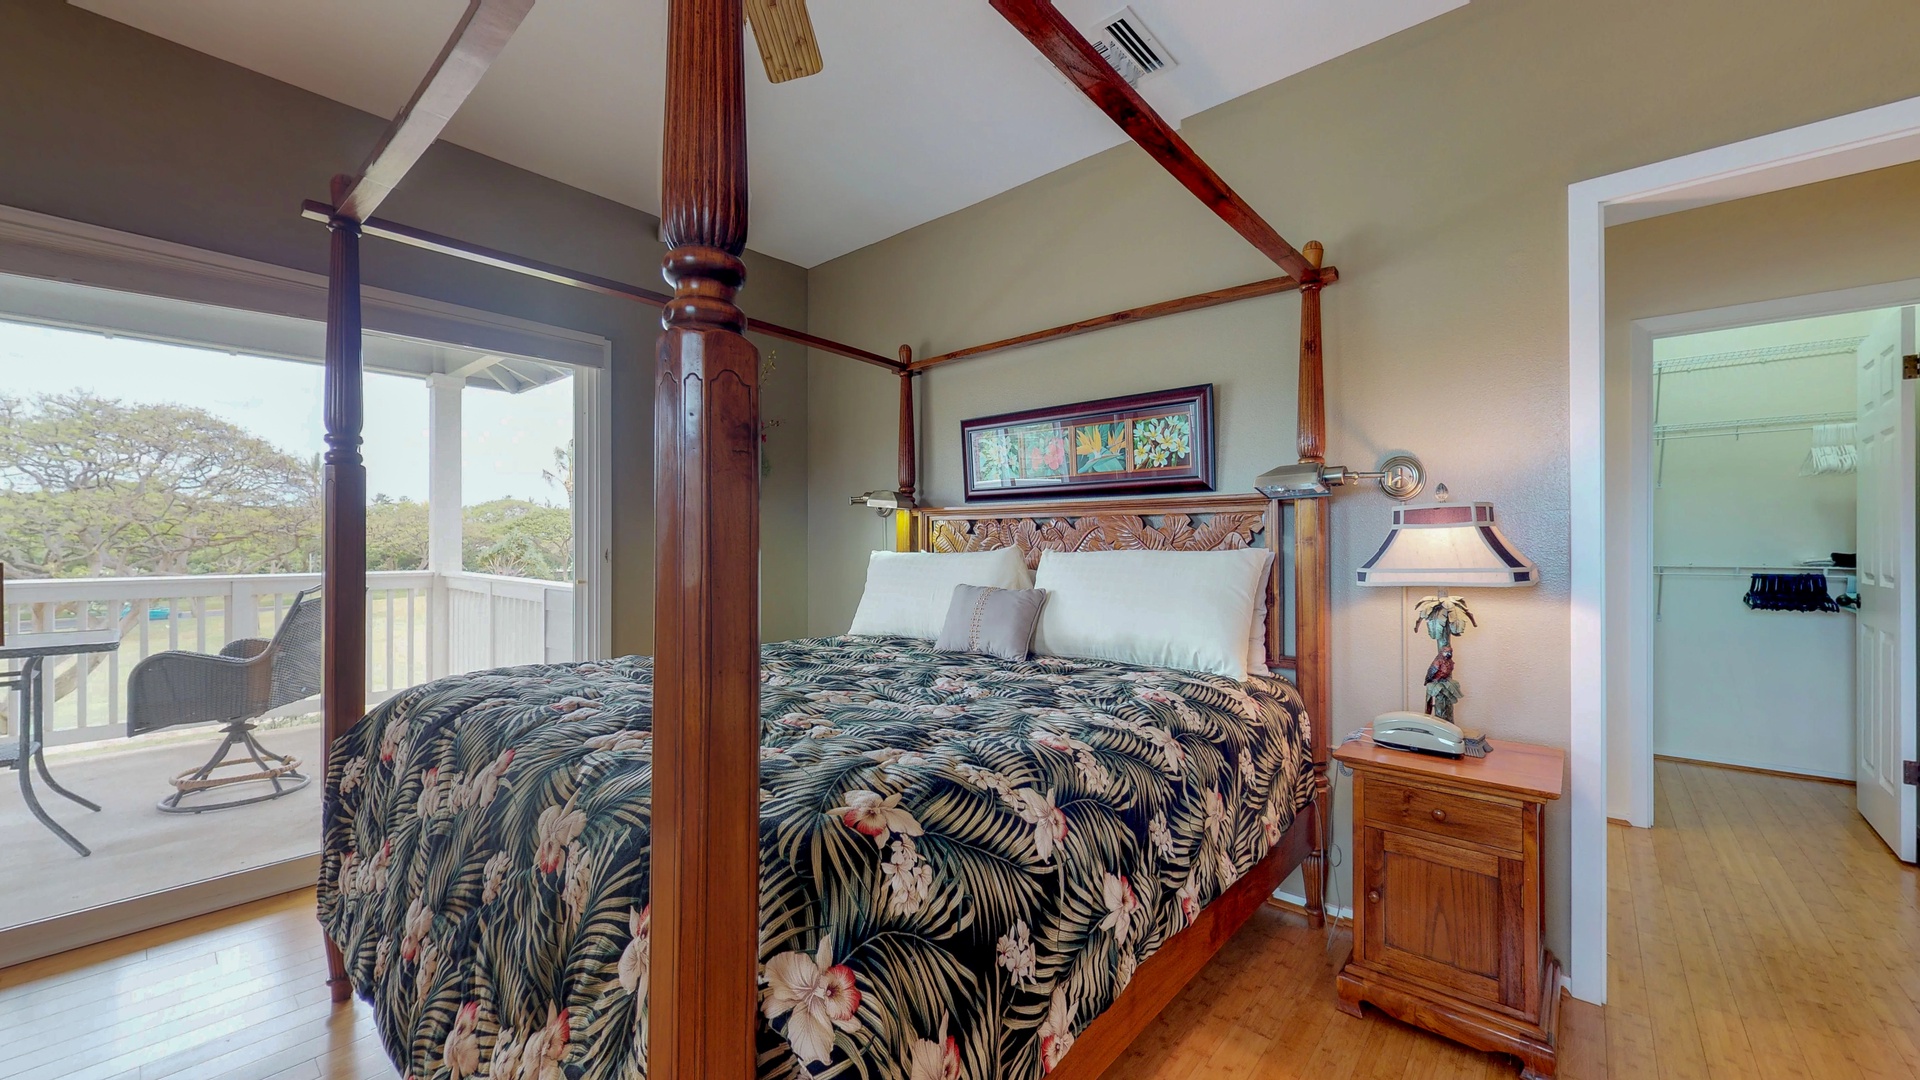 Kapolei Vacation Rentals, Coconut Plantation 1080-1 - The upstairs primary guest bedroom with Polynesian style furnishings and access to the lanai.